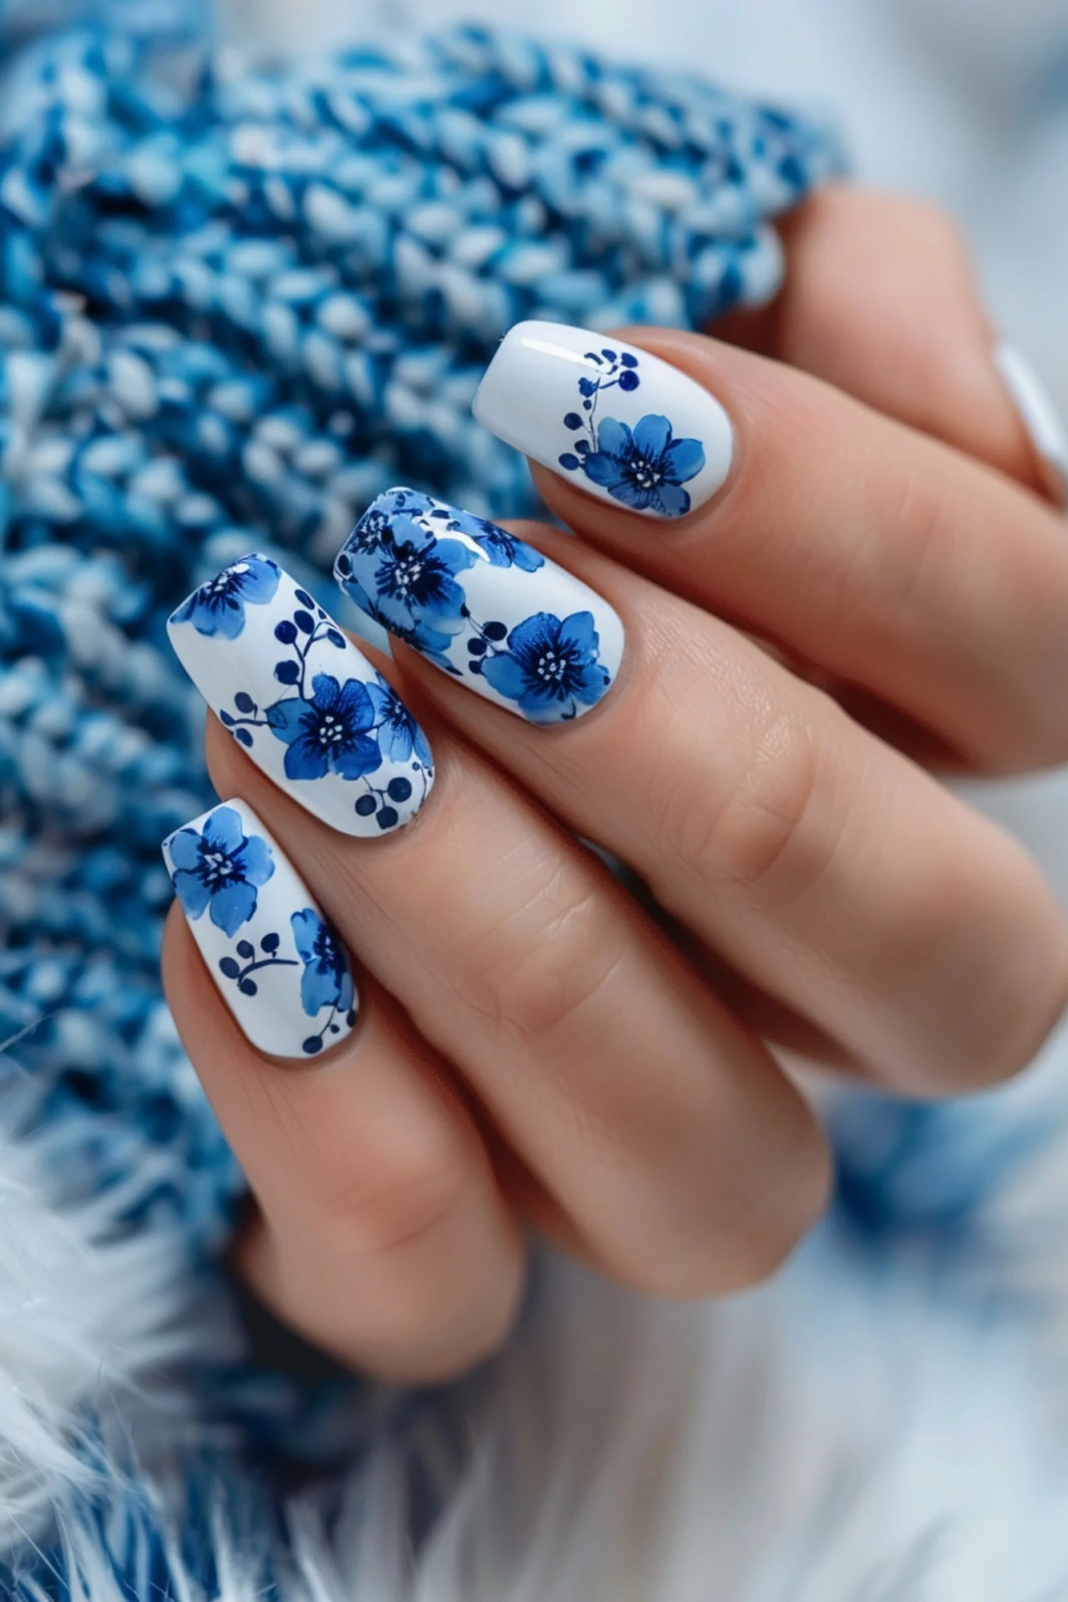 These nails display a delicate balance of blue and white, with a touch of silver glitter for added glamour. The floral patterns are meticulously painted, with different shades of blue creating depth and dimension. The combination of square and oval shapes adds a unique and stylish flair. ​